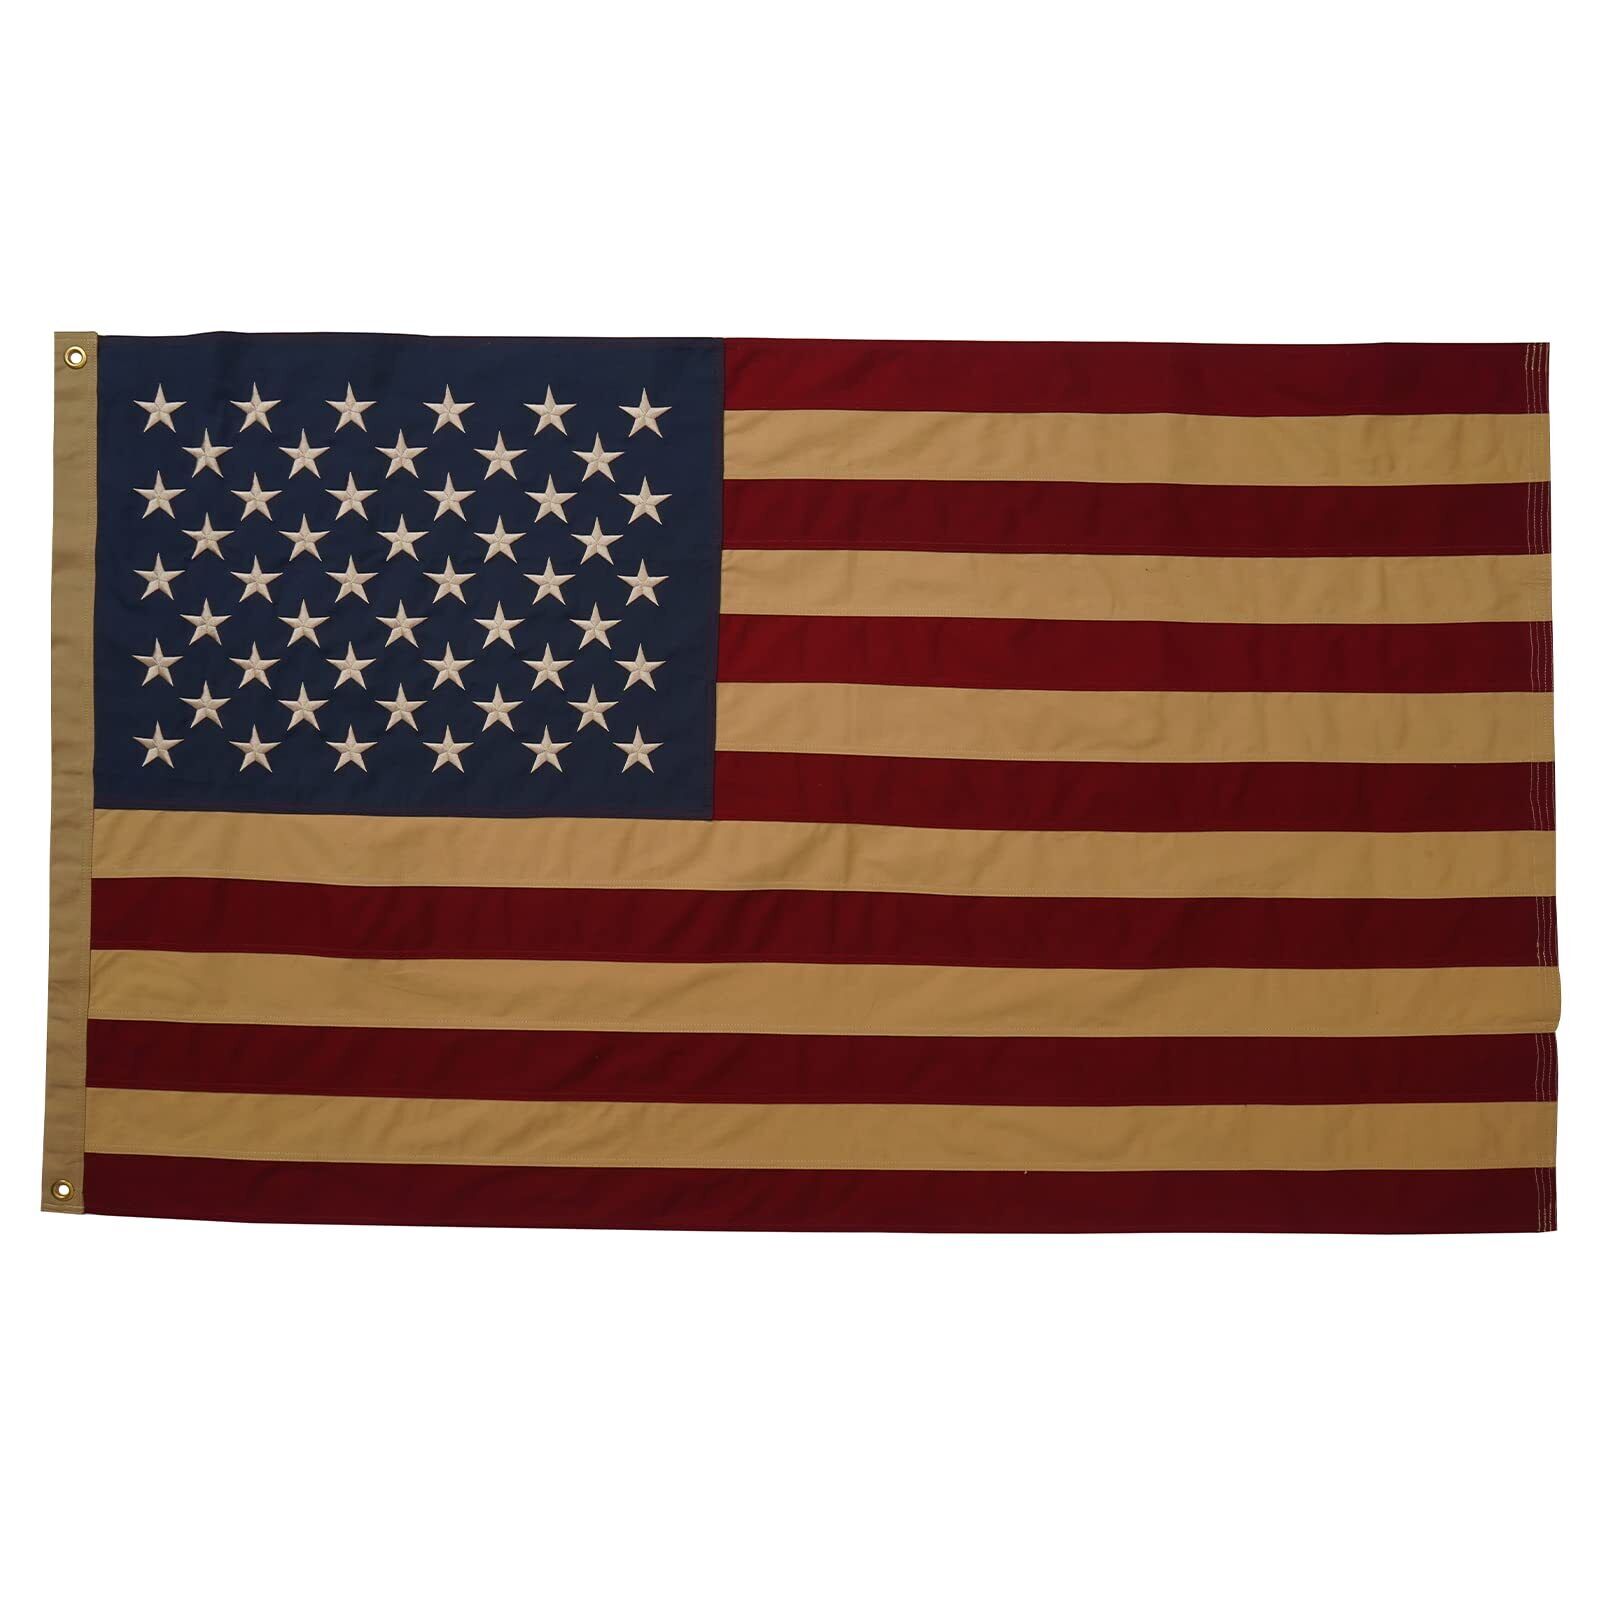 Vintage American Cotton Flag 3x5 Ft Made in USA, Luxury Embroidered Stars and...